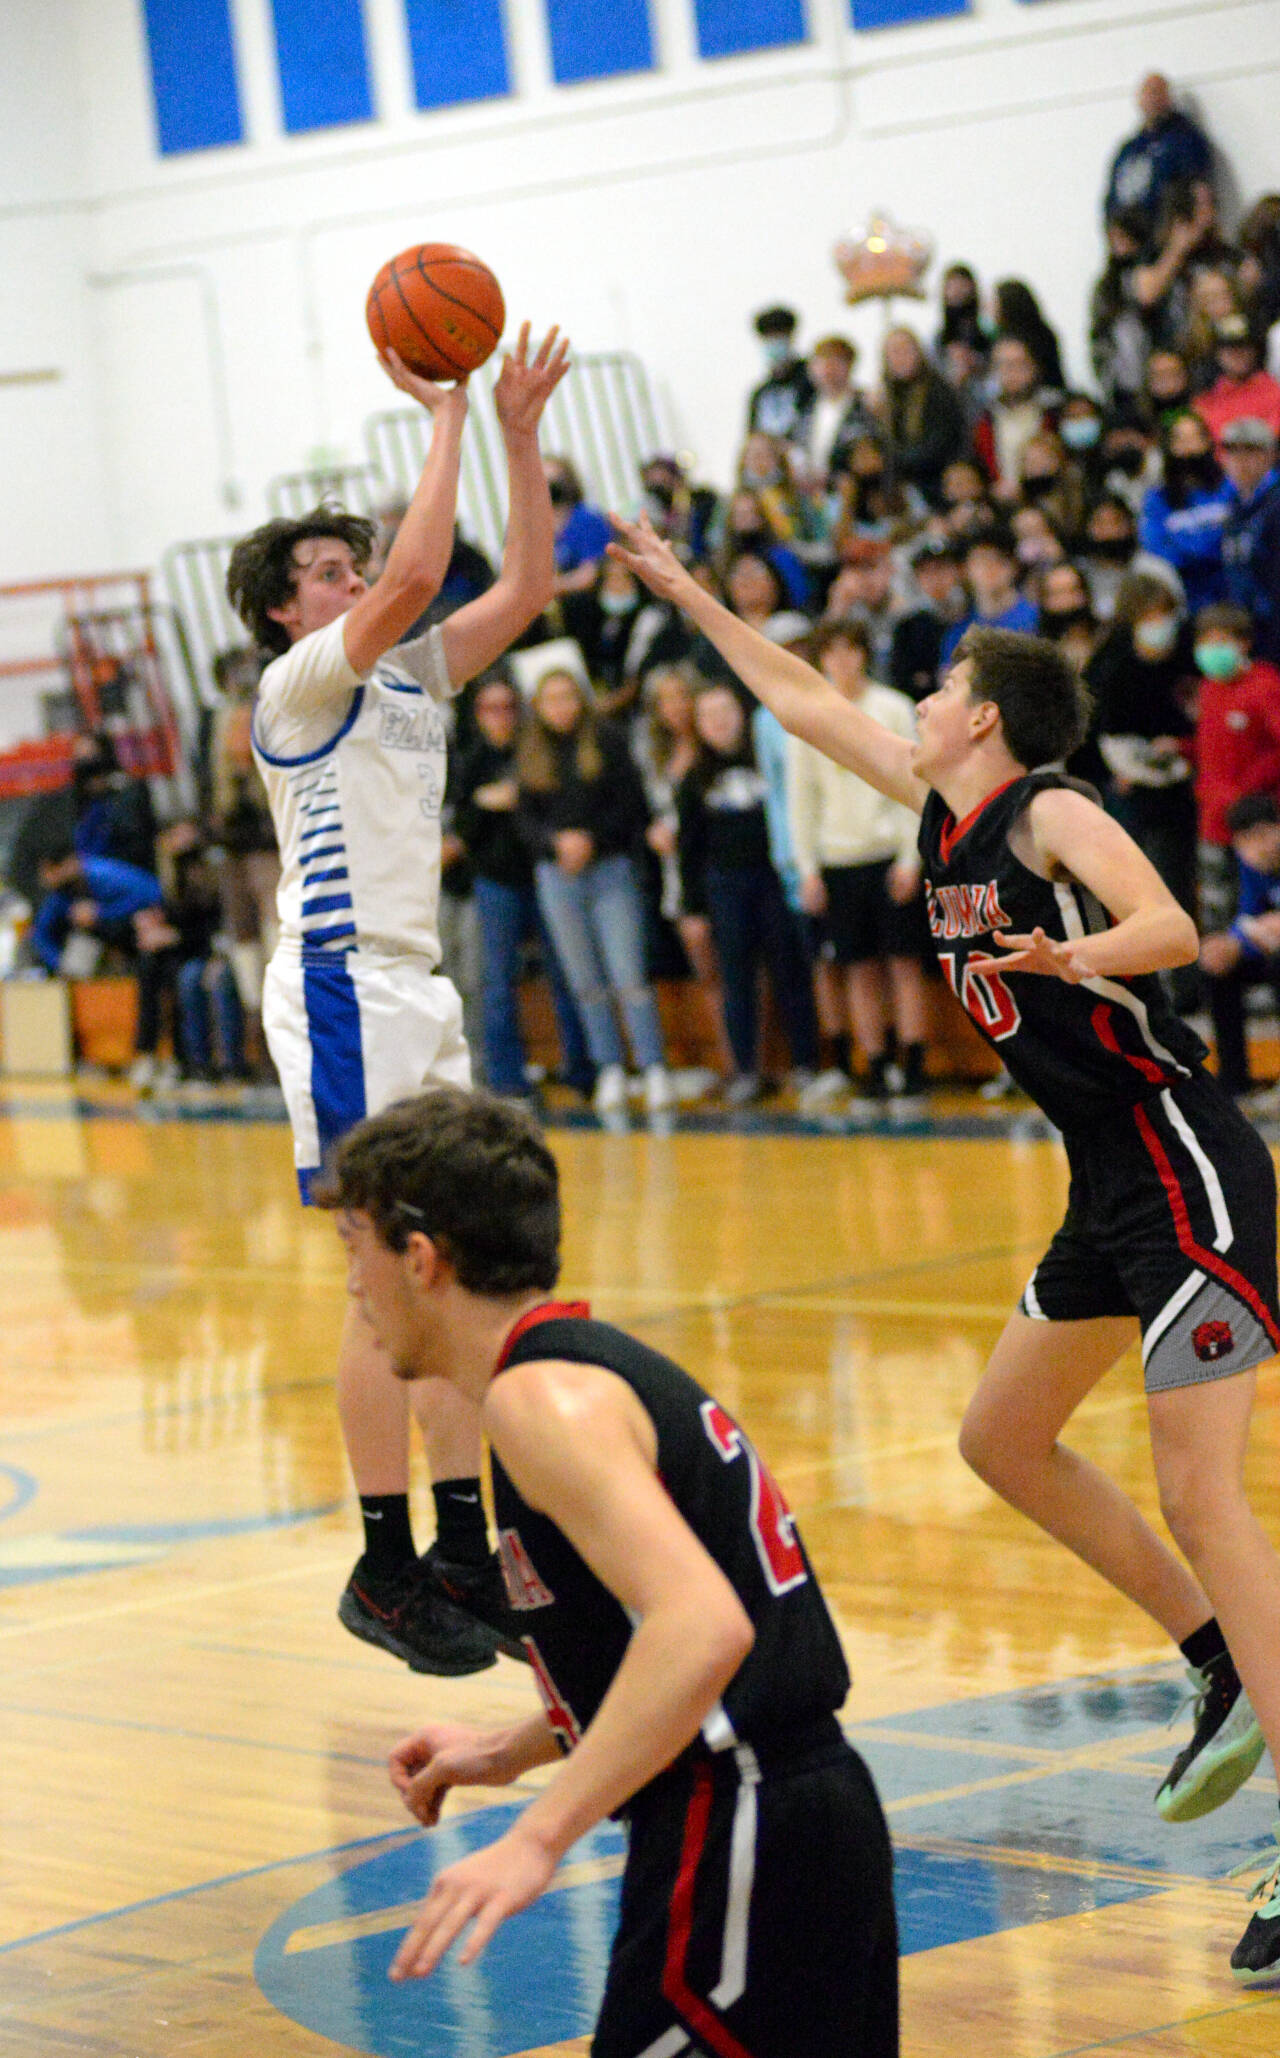 RYAN SPARKS | THE DAILY WORLD
Elma's Logan Witt hits a jump shot during the Eagles 69-46 victory on Friday in Elma. Witt scored 20 points to lead all scorers.